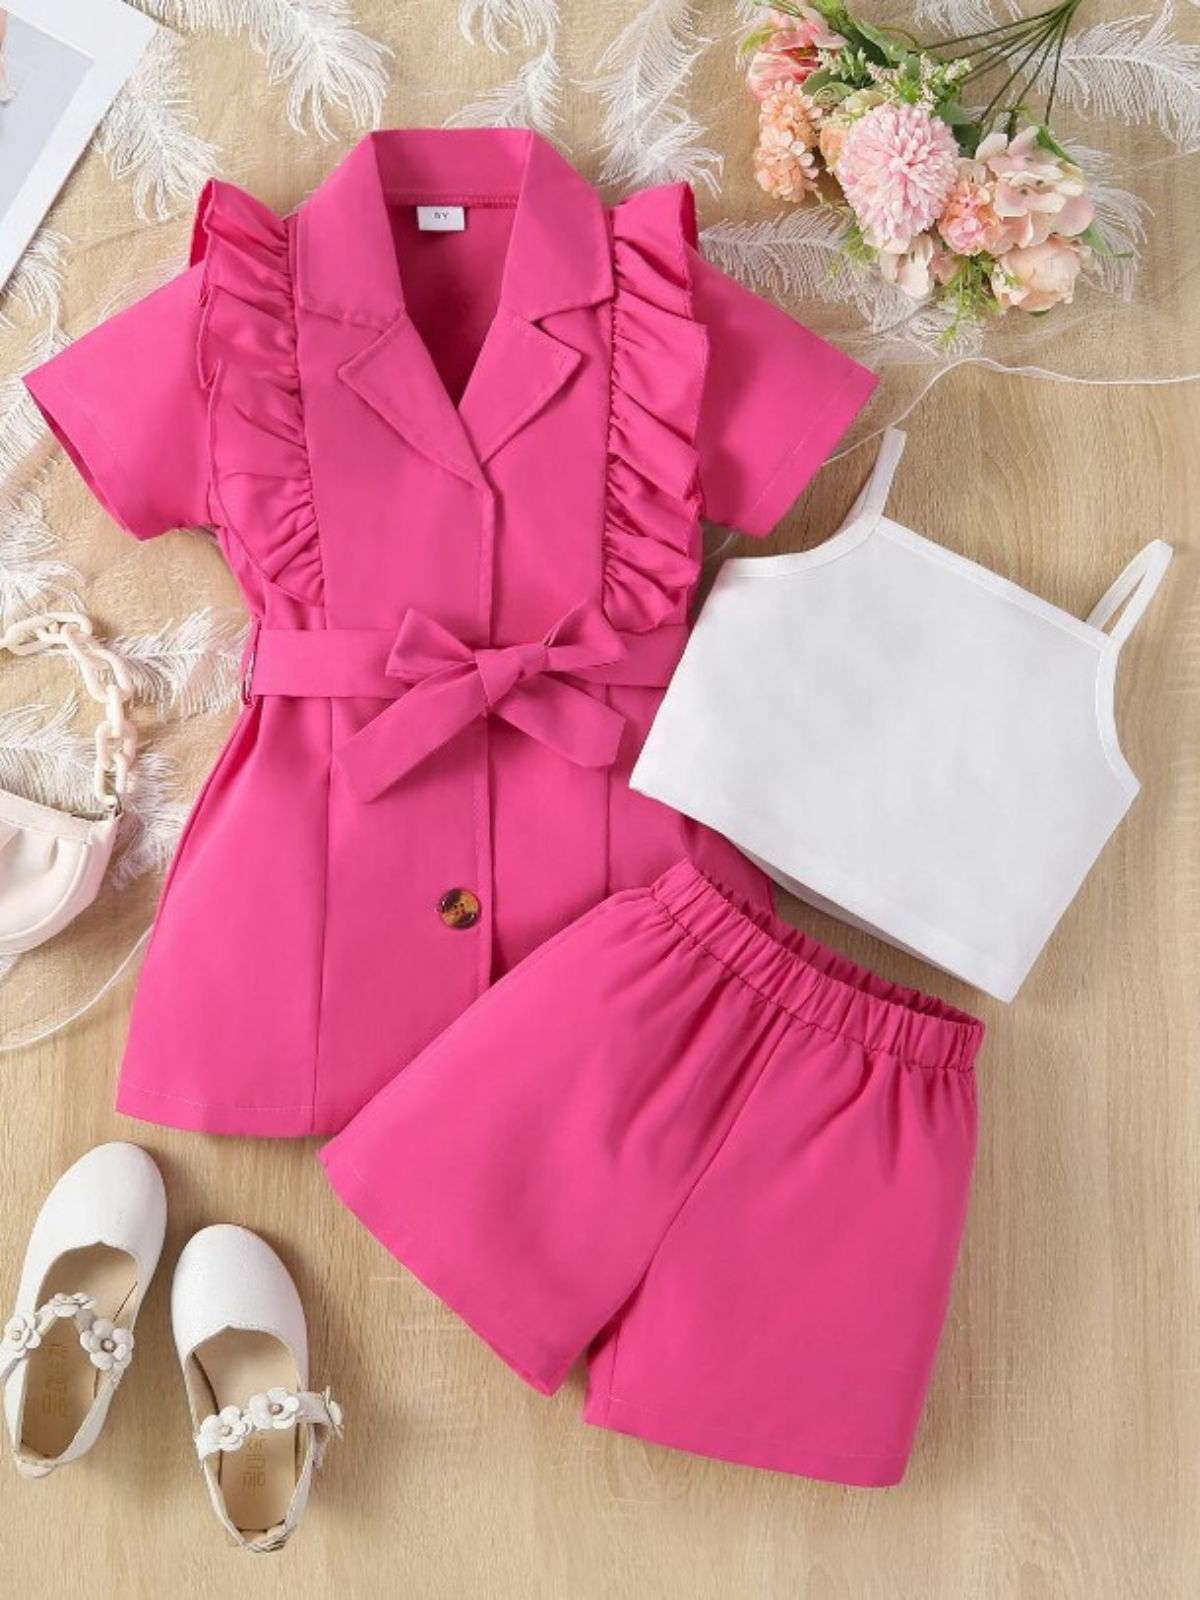 Blazer Crop Top And Shorts Set | Summer Outfits | Mia Belle Girls